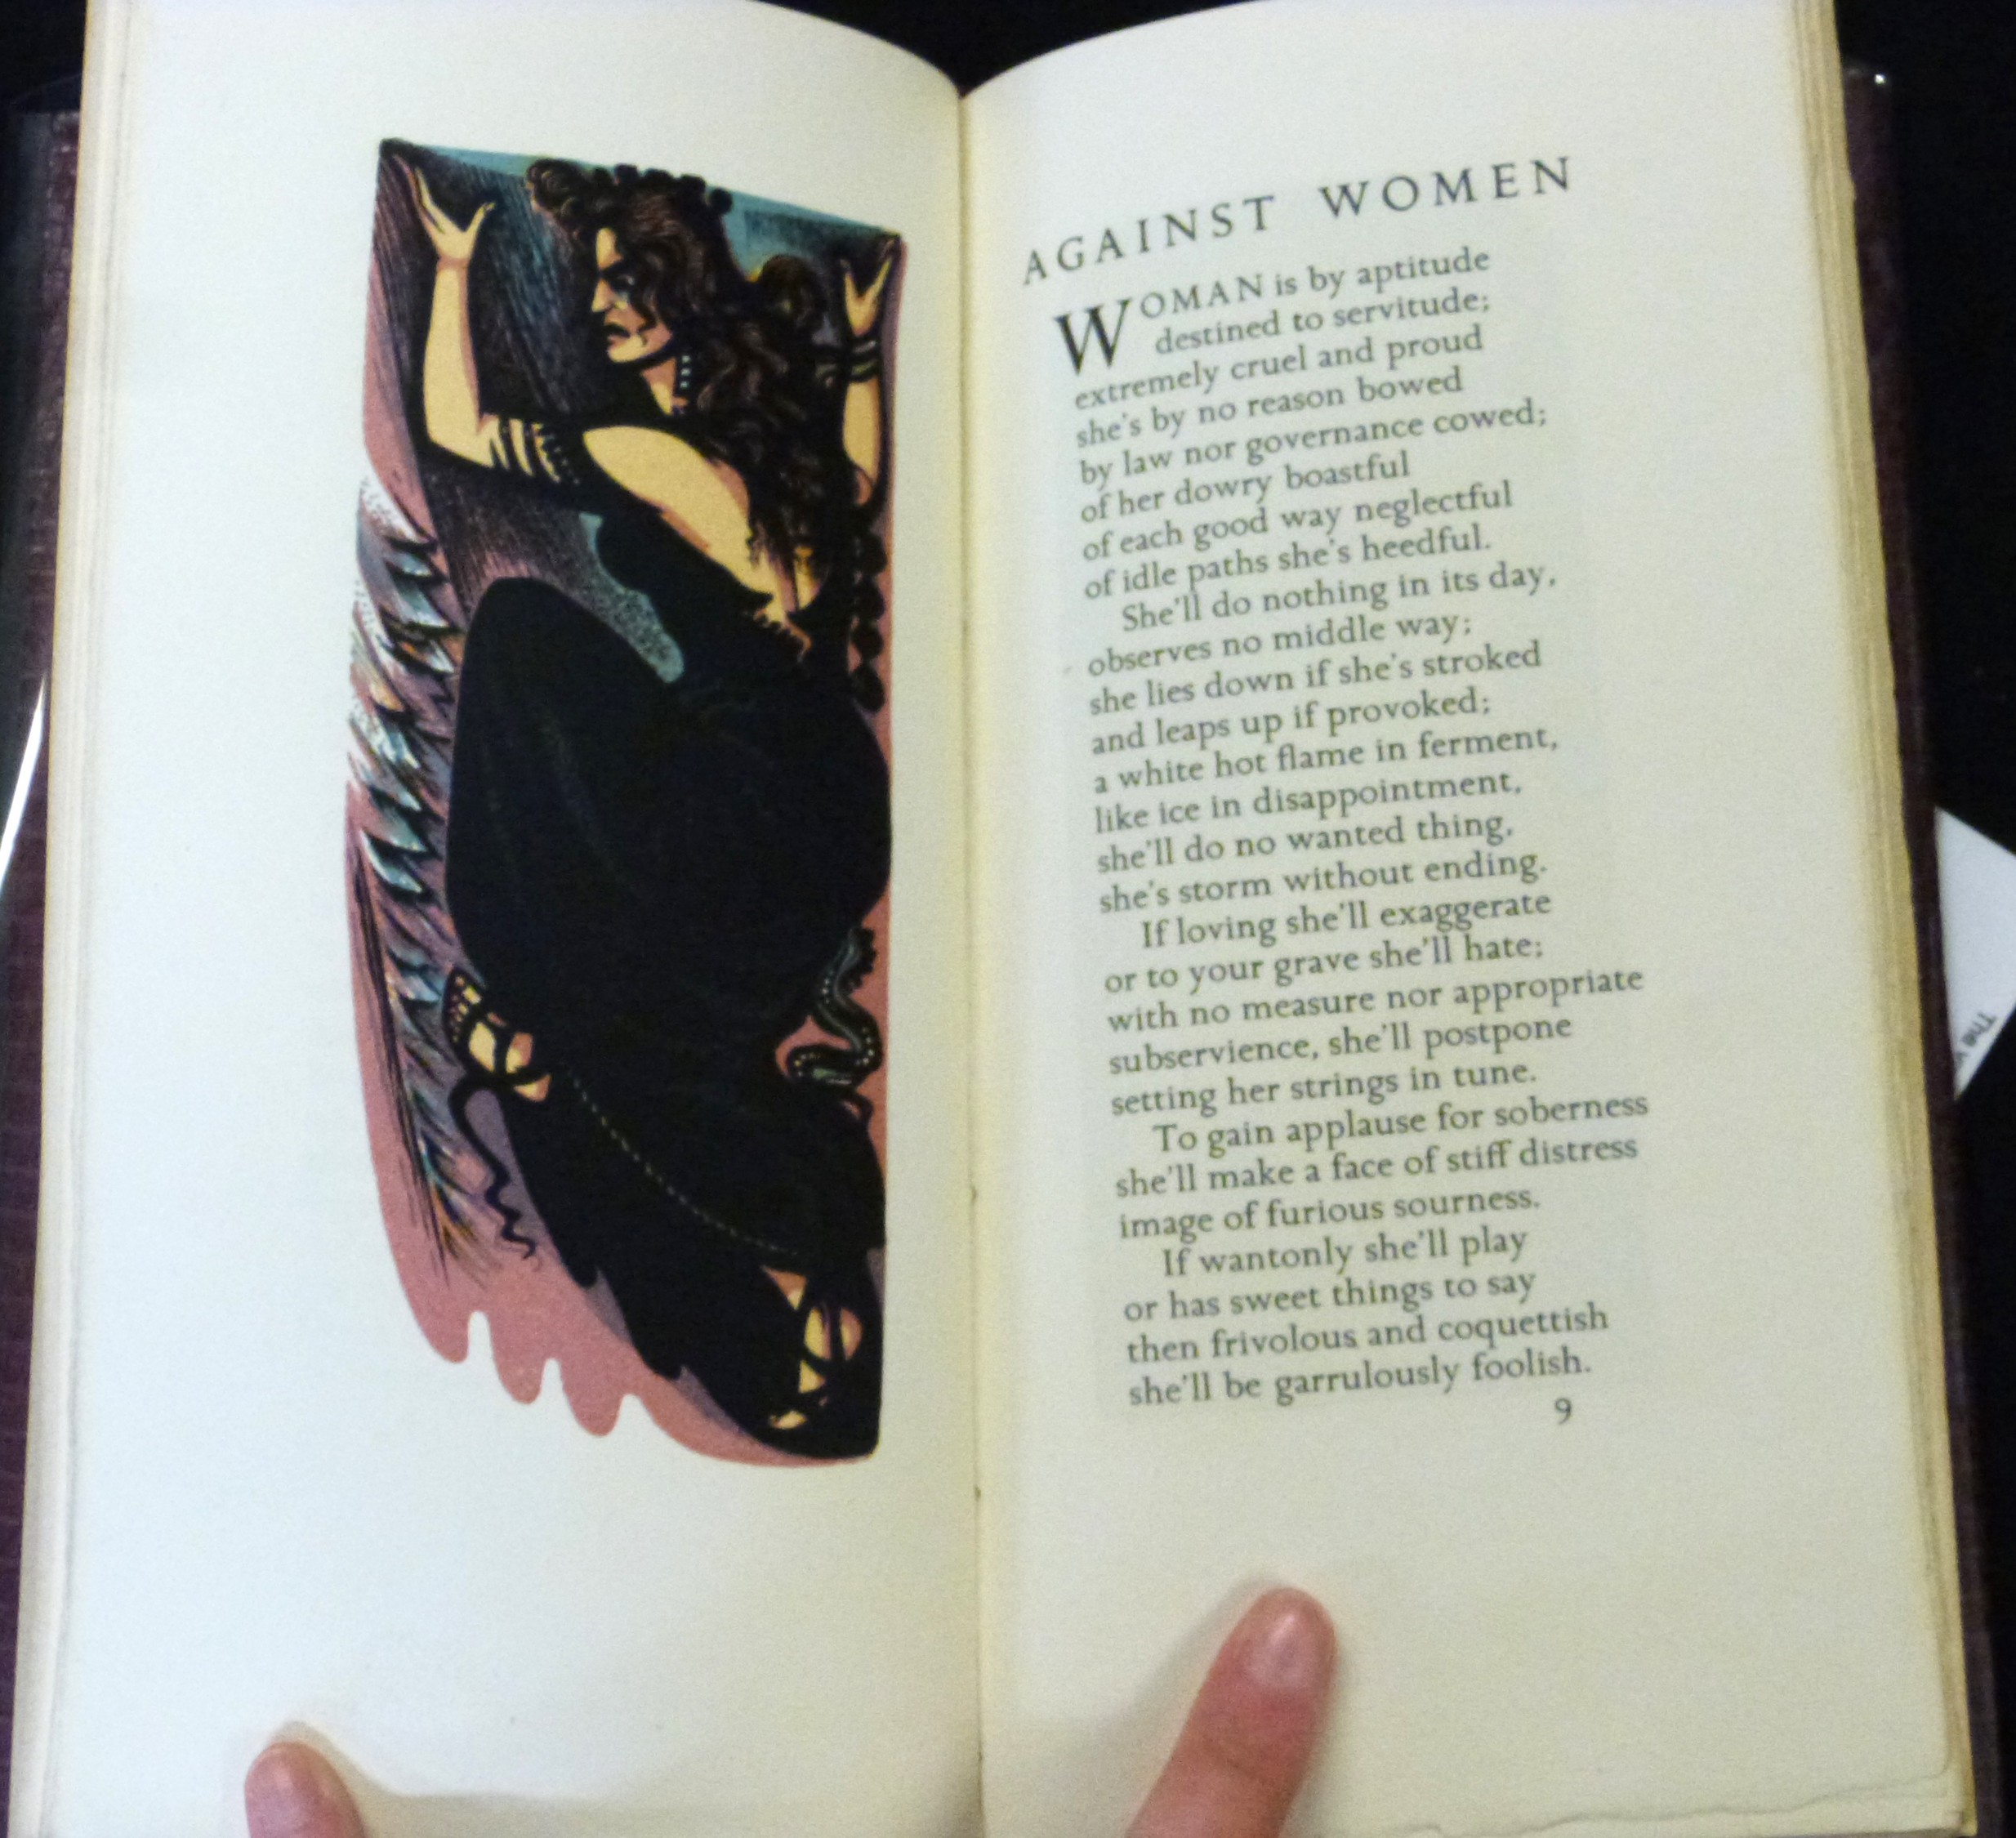 GWYN WILLIAMS: AGAINST WOMEN, A SATIRE TRANSLATED FROM THE OLD WELSH, ill John Petts, London, Golden - Image 3 of 3